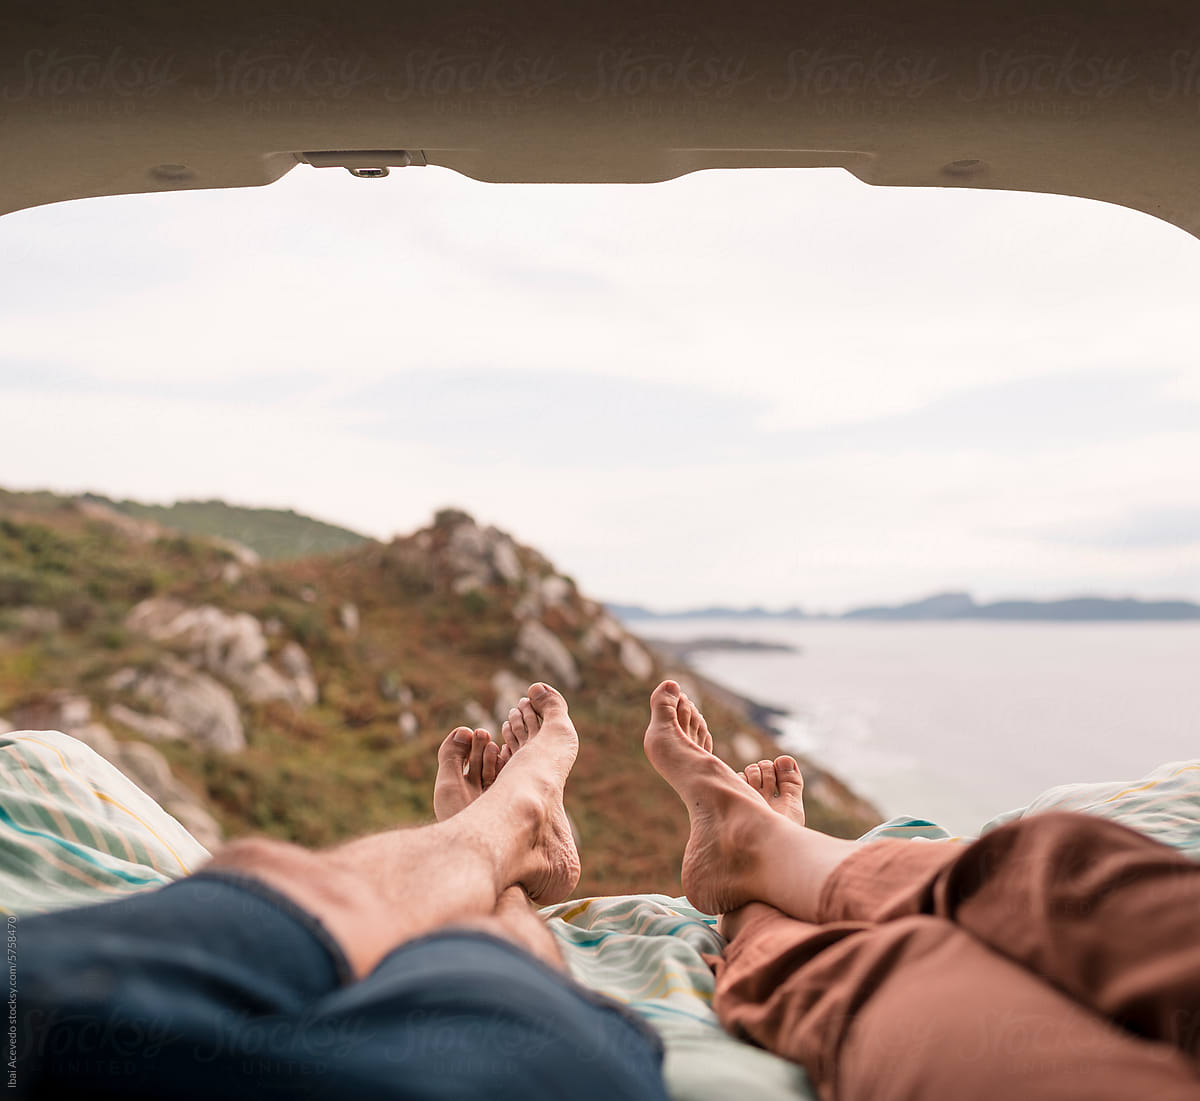 Couple legs resting on camper van bed with beautiful view